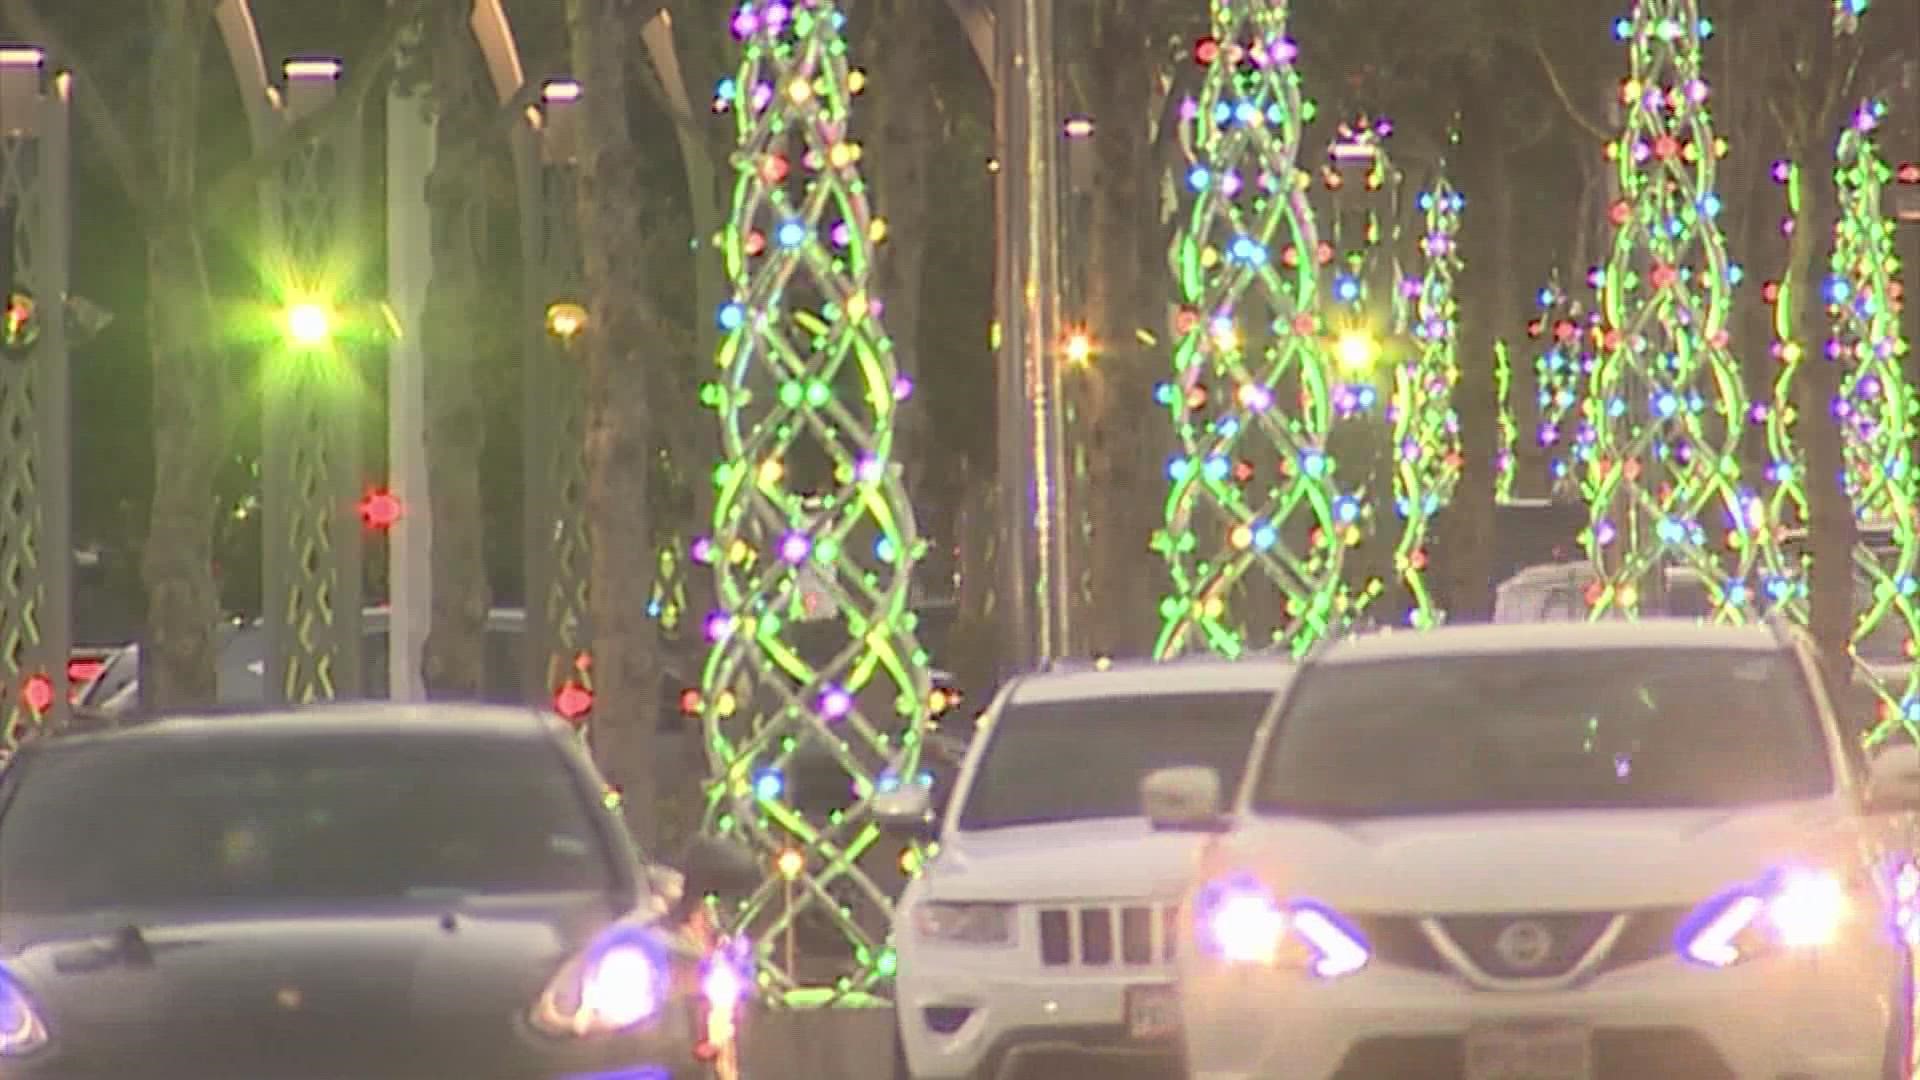 According to AAA Texas, nearly 9 million Texans will be driving out of town. AAA Texas projects this to be one of the busiest holiday seasons in 20 years.